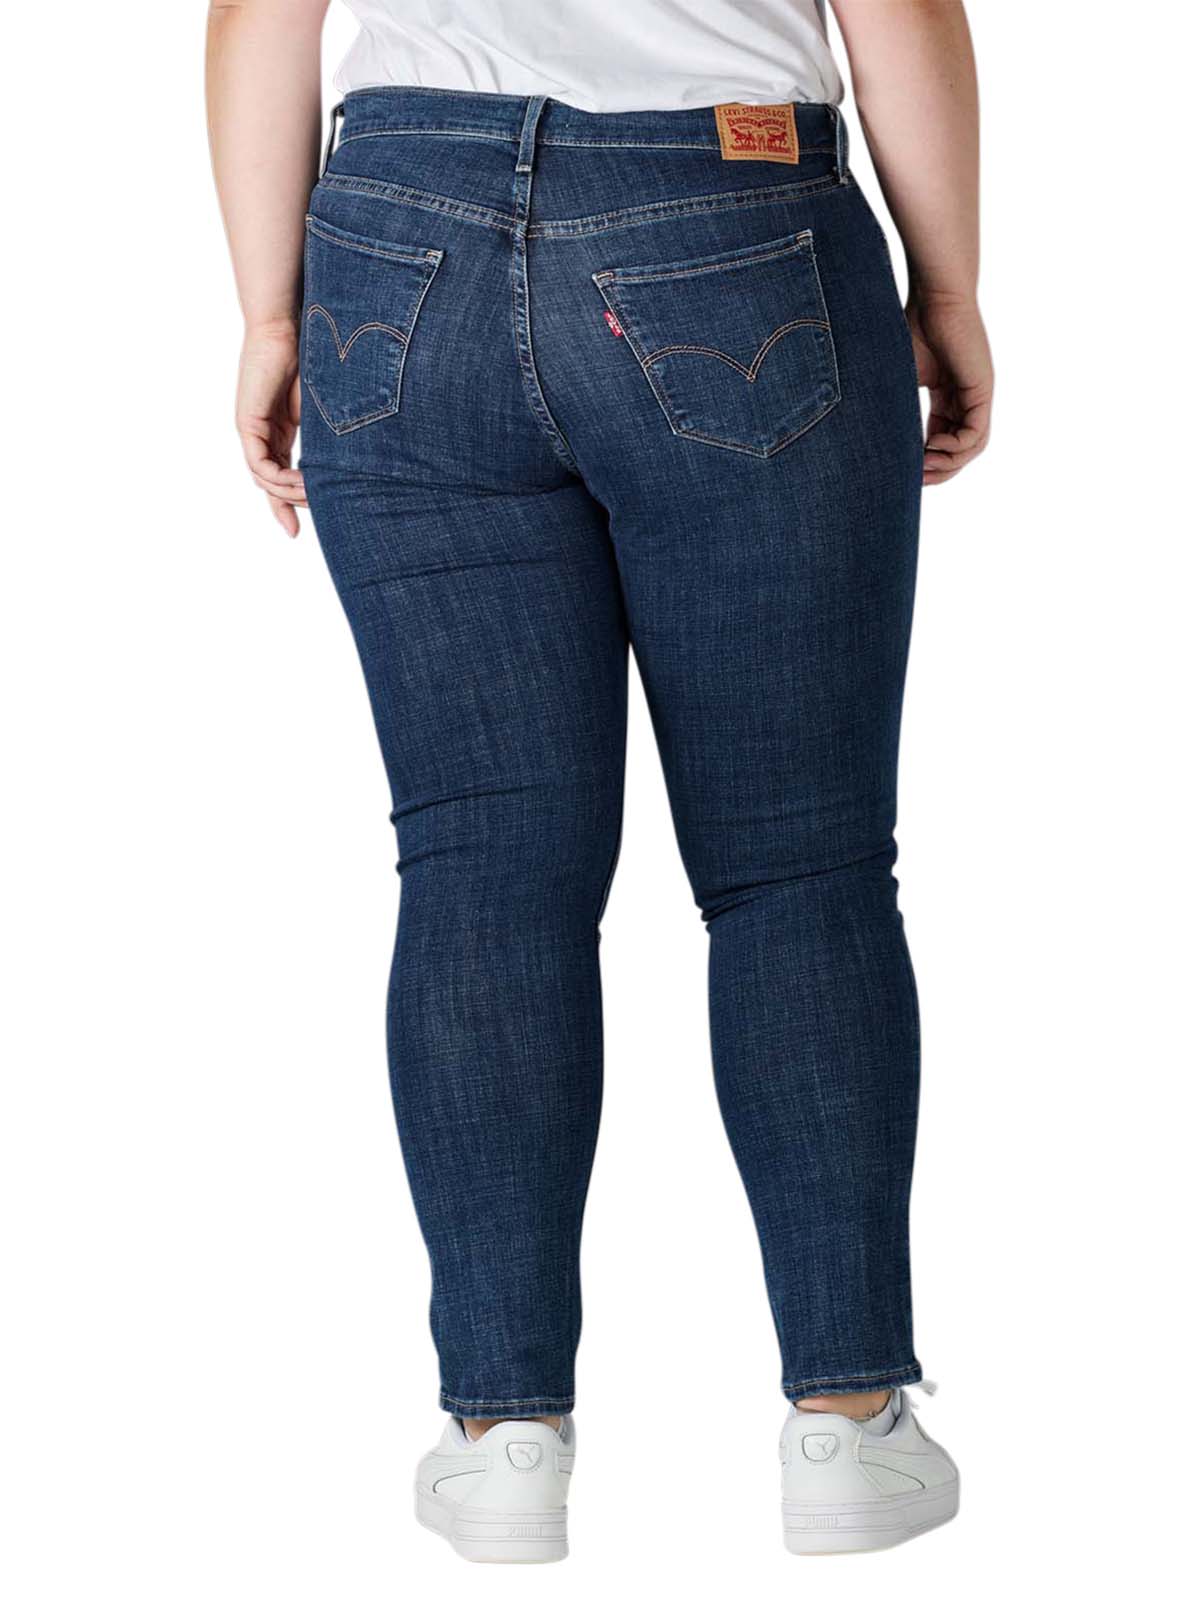 Levi's 311 Jeans Shaping Skinny Plus Size maui views plus sp Levi's Women's  Jeans | Free Shipping on  - SIMPLY LOOK GOOD